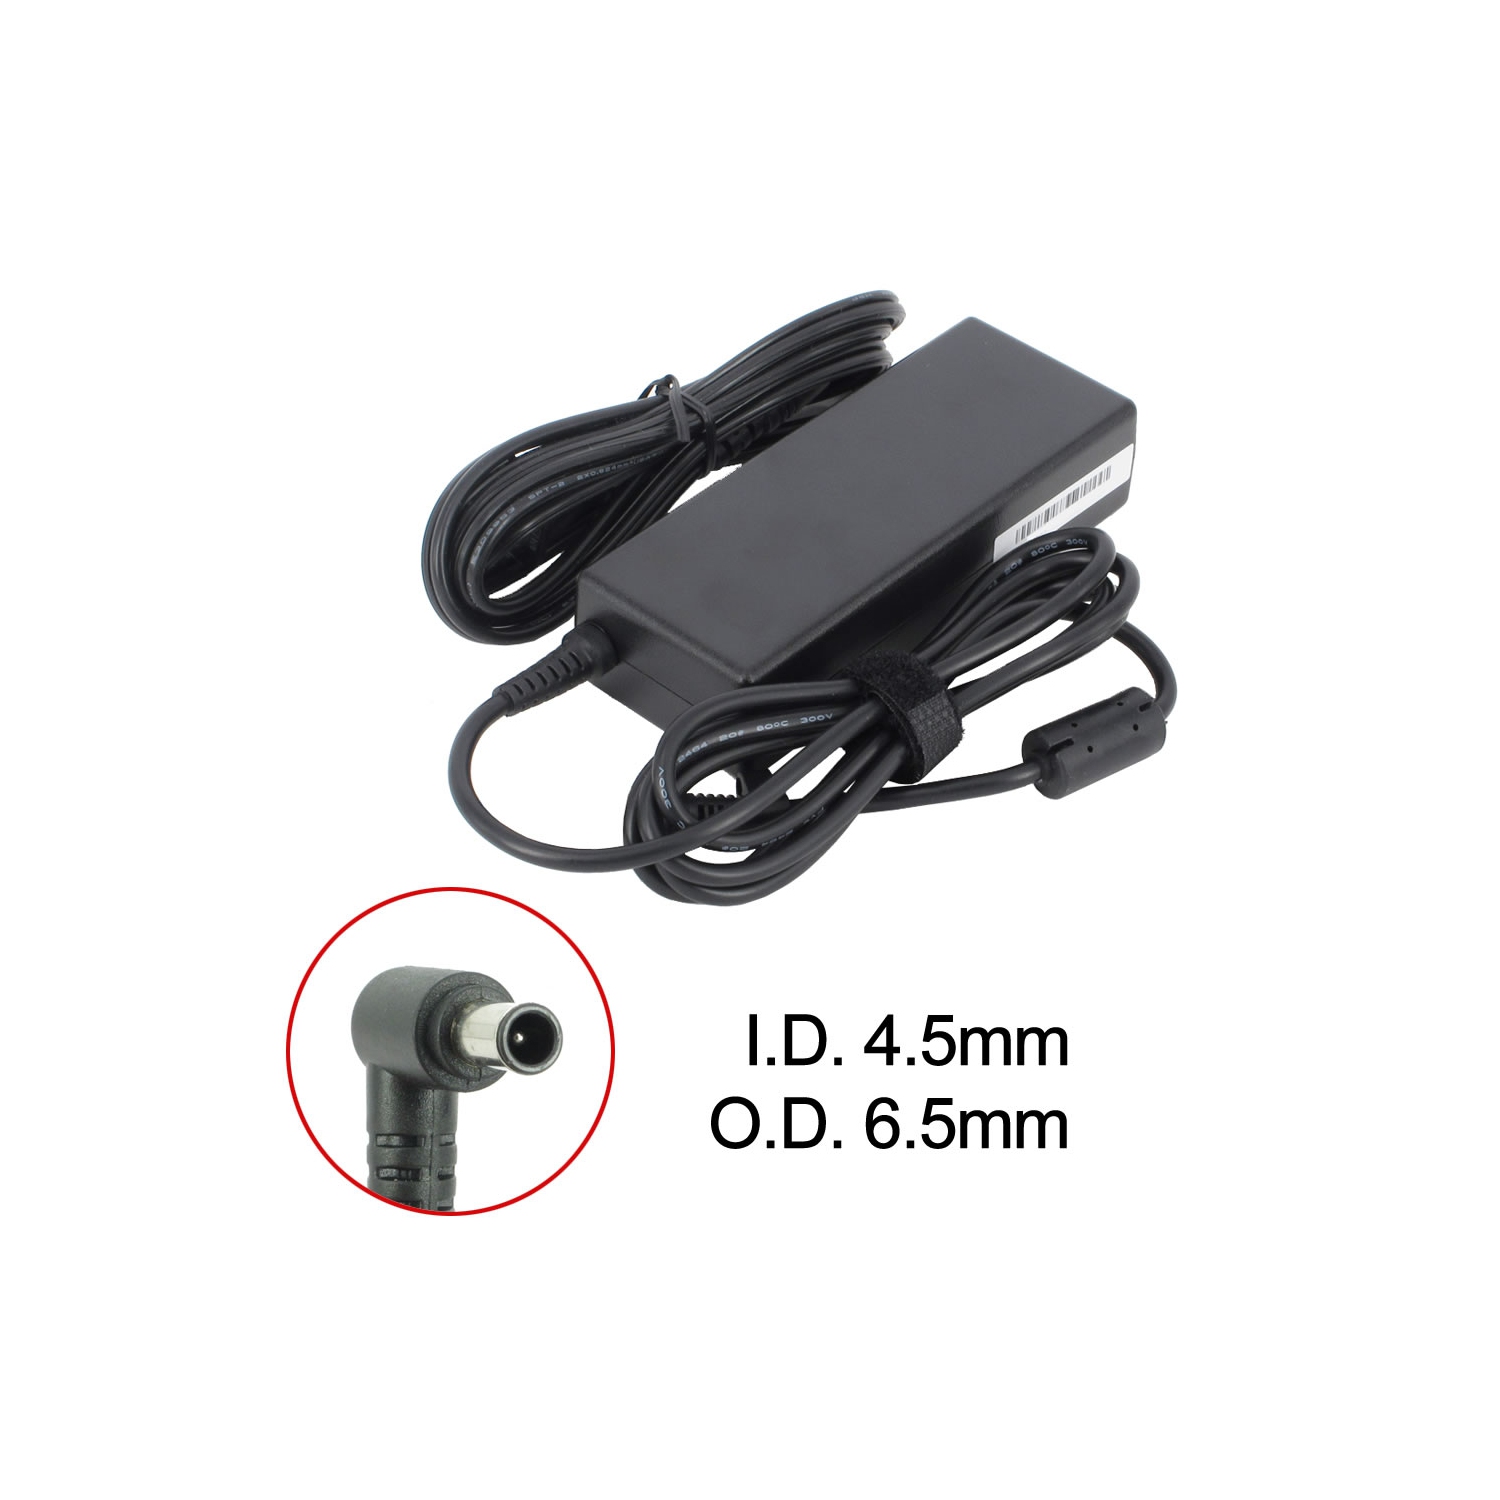 Brand New Laptop AC Adapter for Sony VAIO VGN-NS20S/S, PCGA-AC19V11, VGP-AC19V10, VGP-AC19V21, VGP-AC19V31, VGP-AC19V67